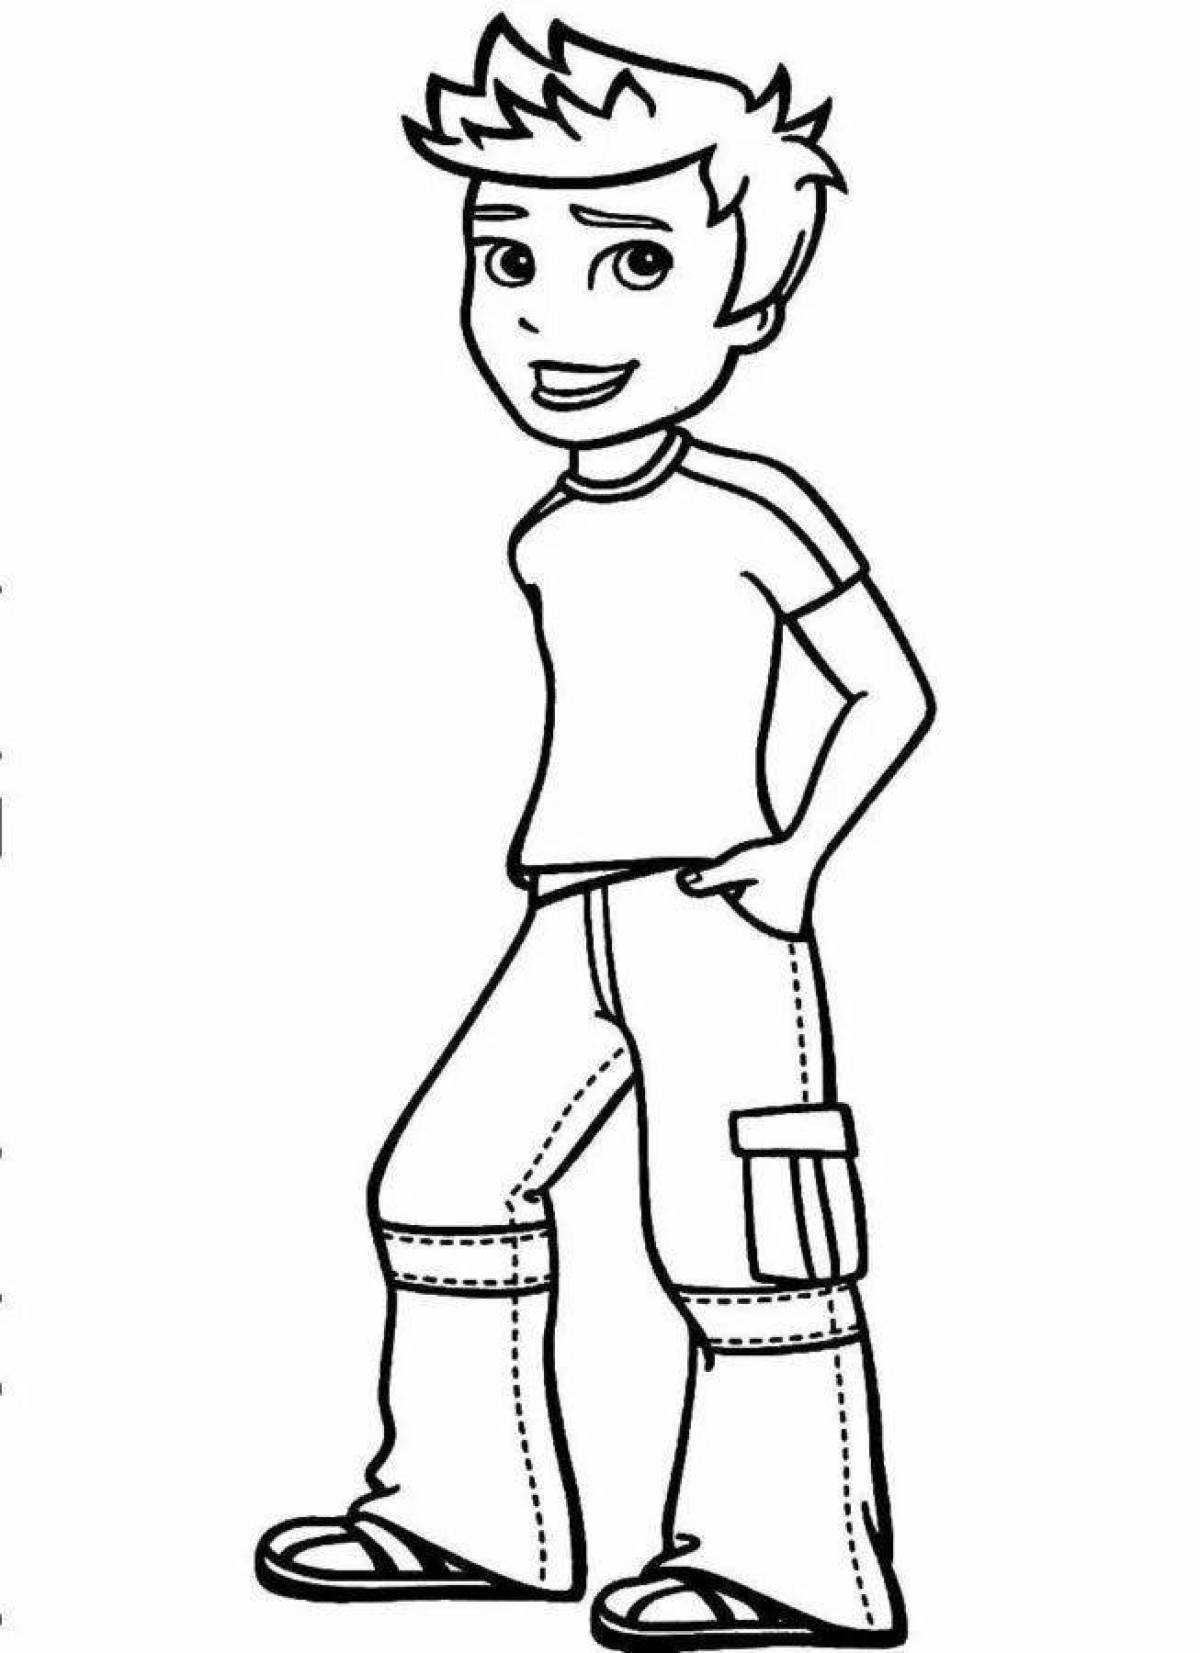 Coloring page without answer